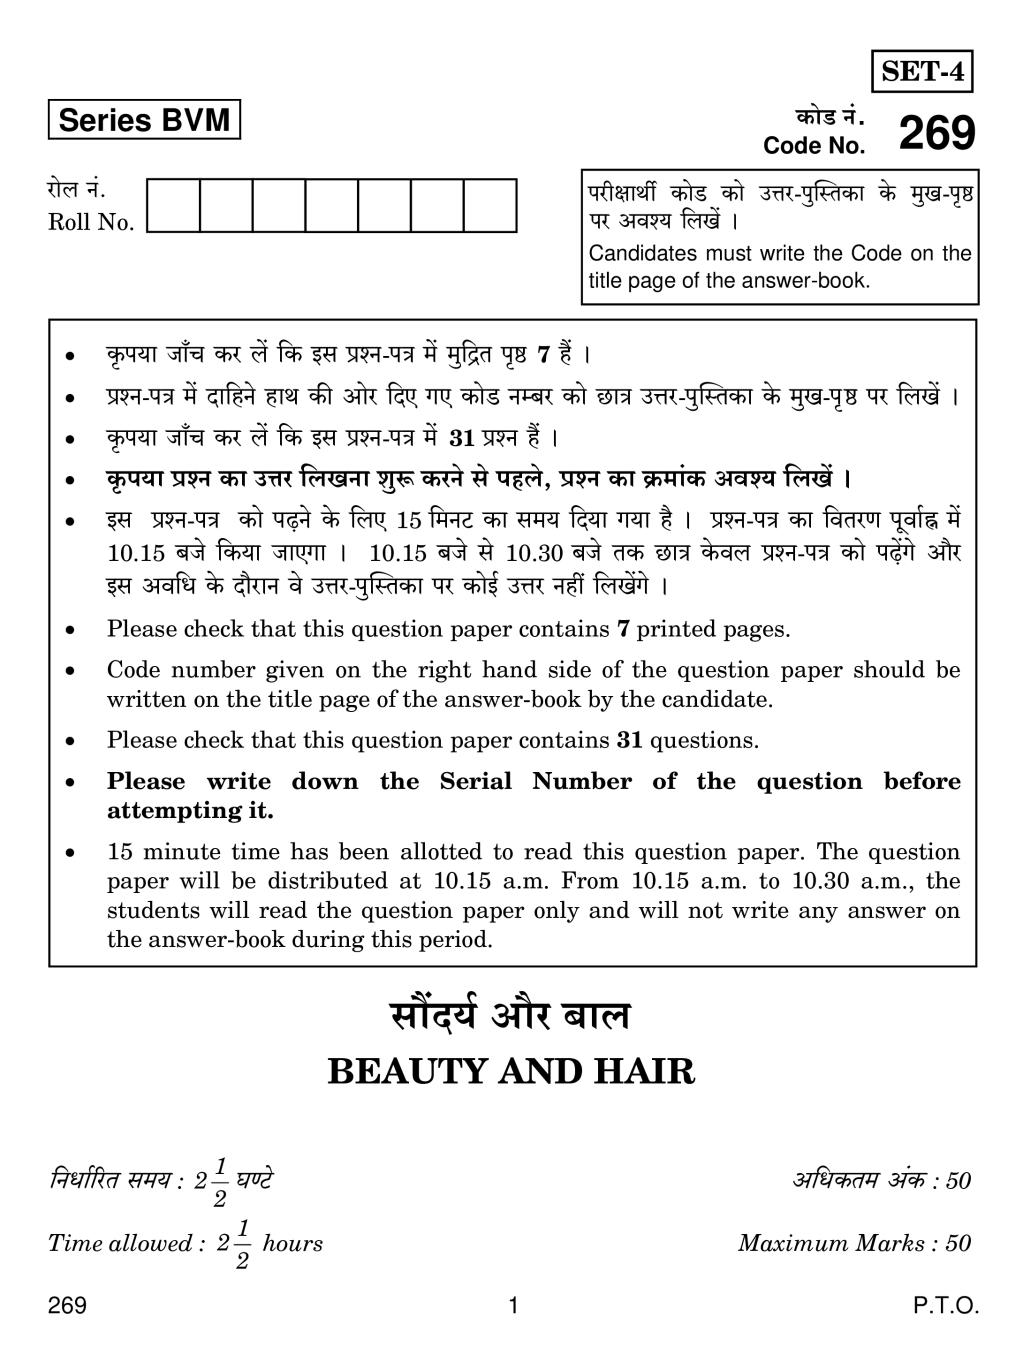 CBSE Class 12 Beauty and Hair Question Paper 2019 - Page 1